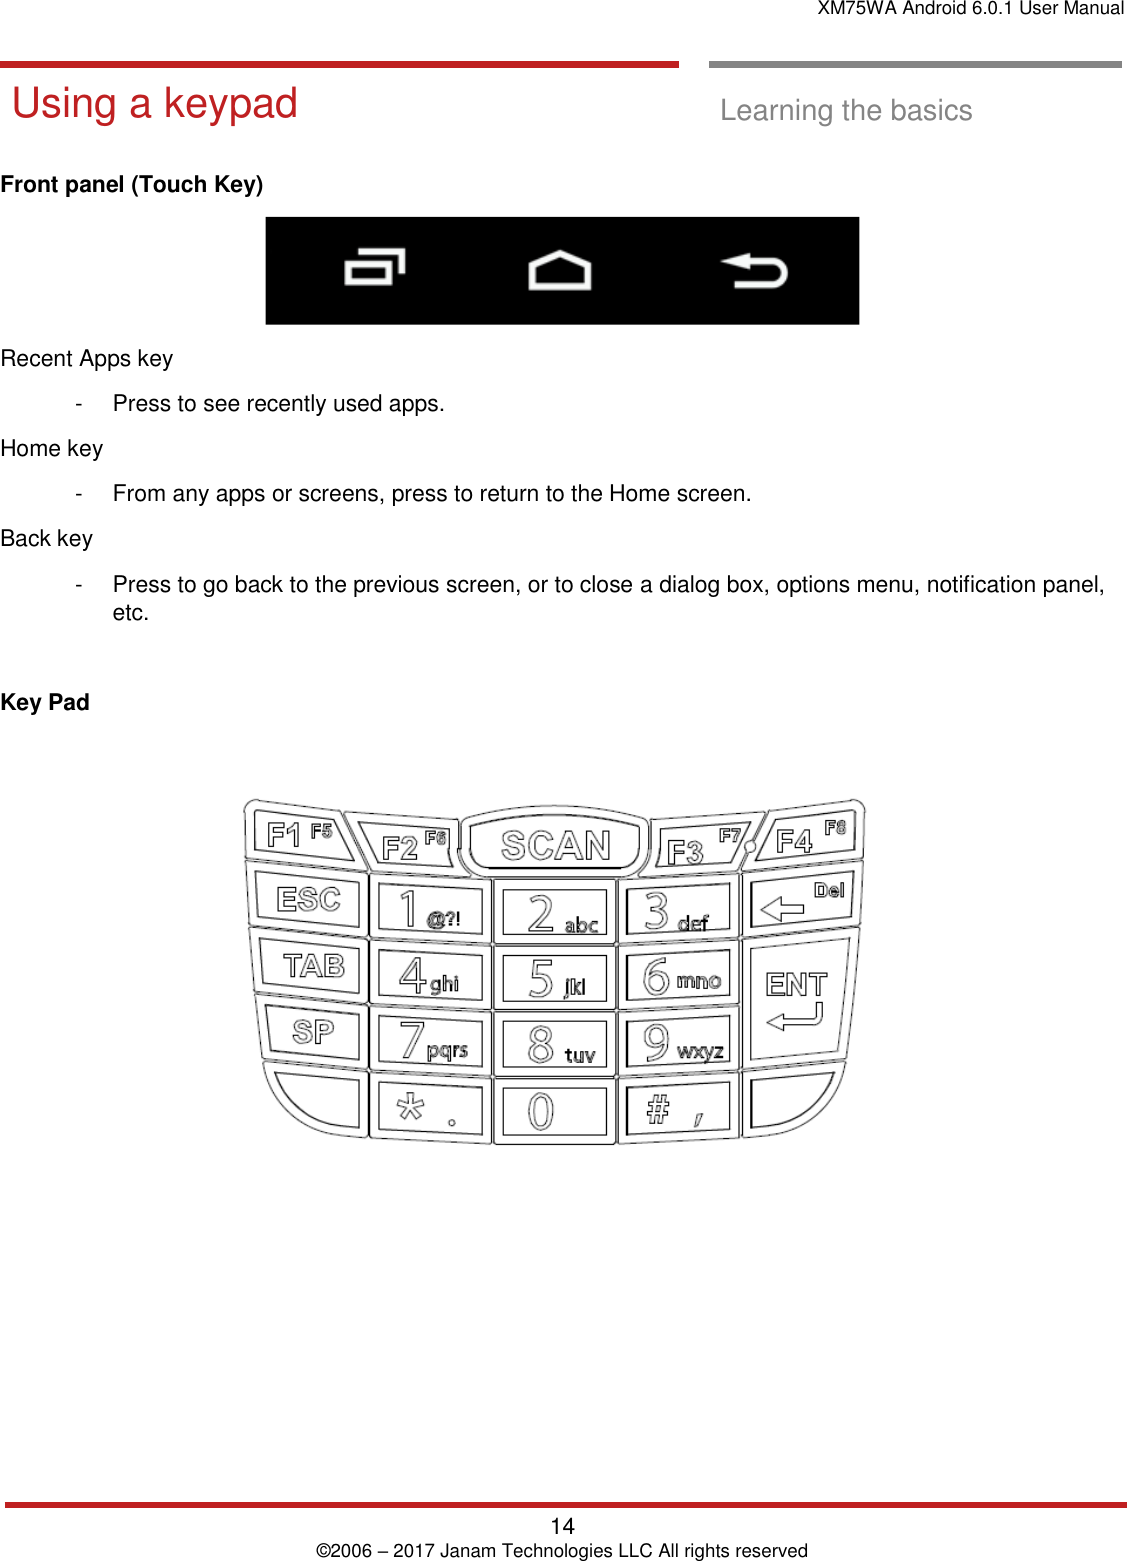 XM75WA Android 6.0.1 User Manual   14 © 2006 – 2017 Janam Technologies LLC All rights reserved  Learning the basics  Using a keypad  Learning the basics  Front panel (Touch Key)   Recent Apps key -  Press to see recently used apps. Home key -  From any apps or screens, press to return to the Home screen. Back key -  Press to go back to the previous screen, or to close a dialog box, options menu, notification panel, etc.  Key Pad        